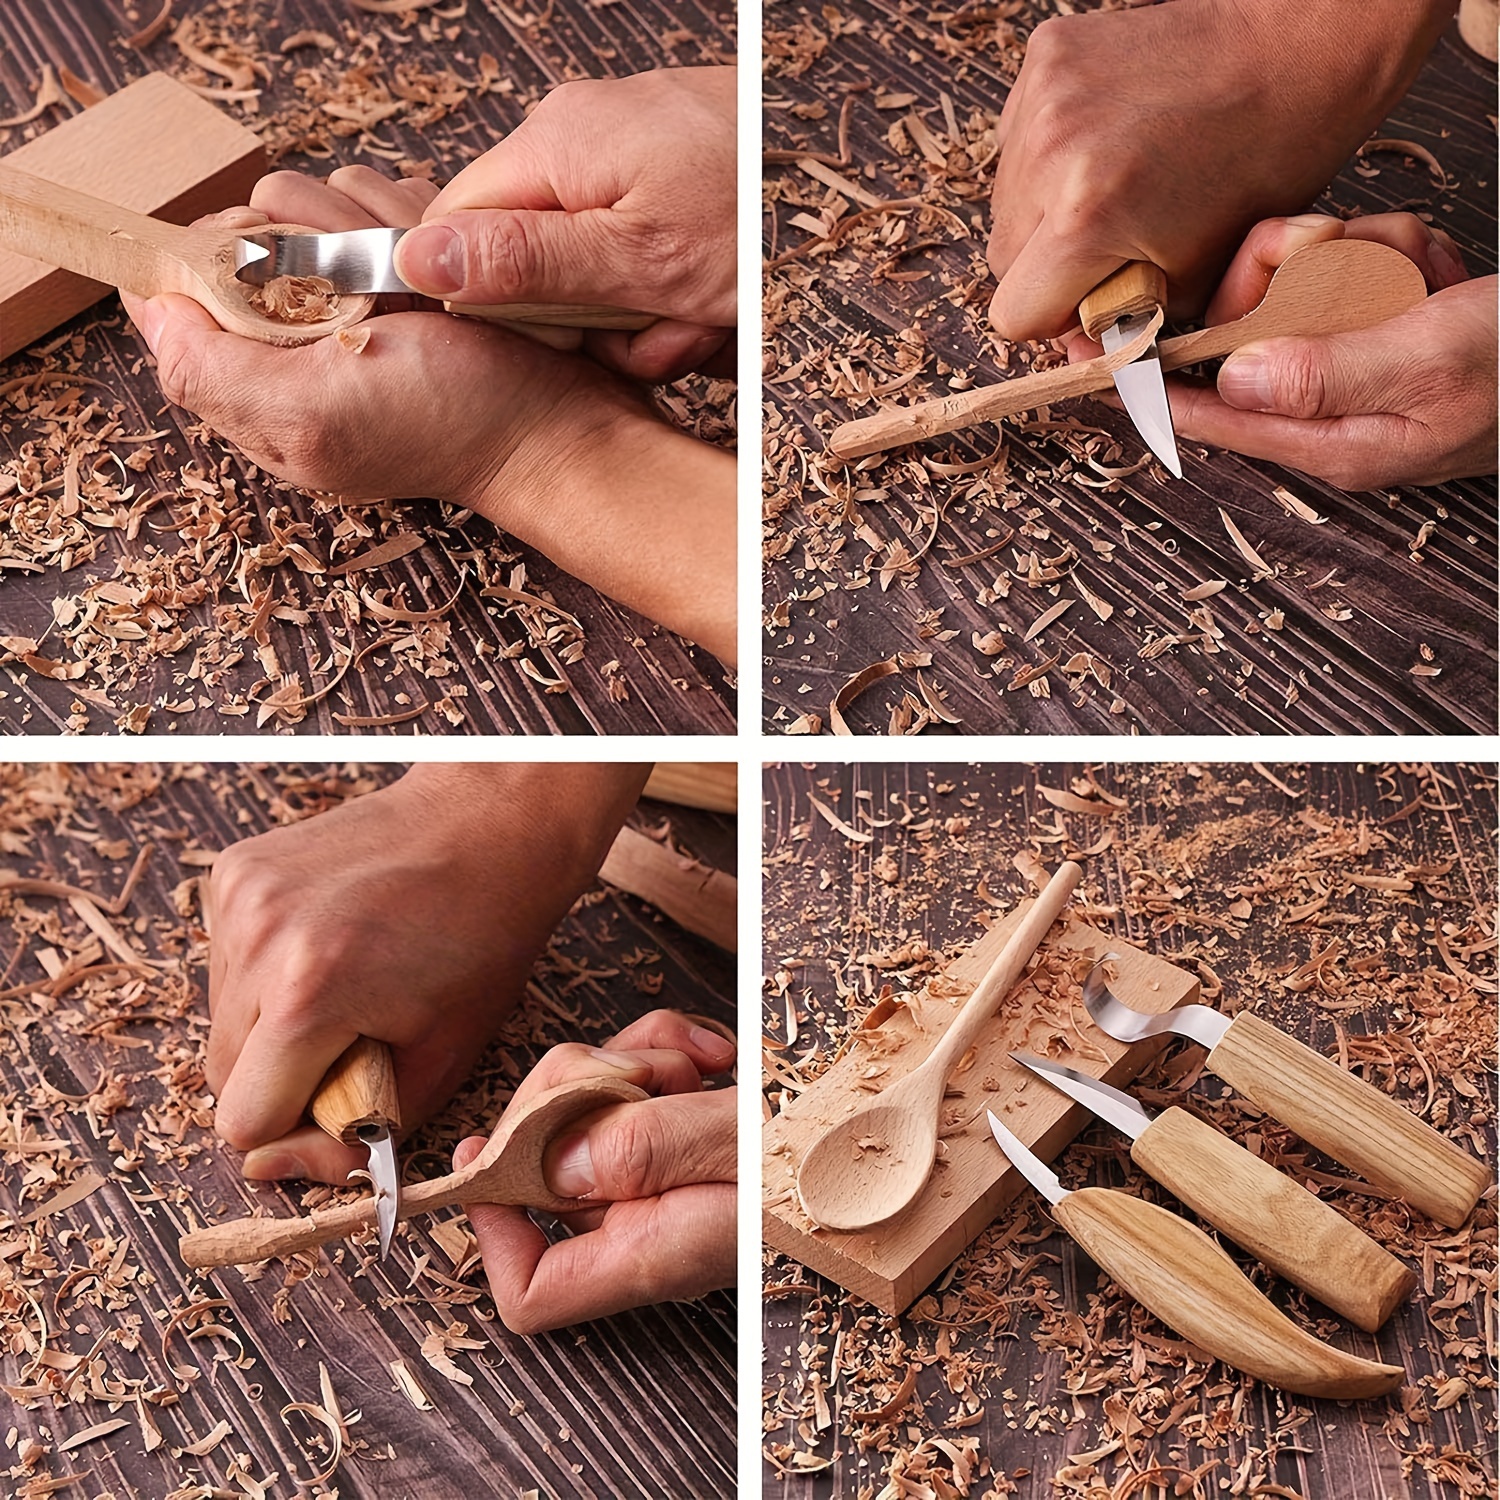 Whittling Tools, Materials and Equipment Series 